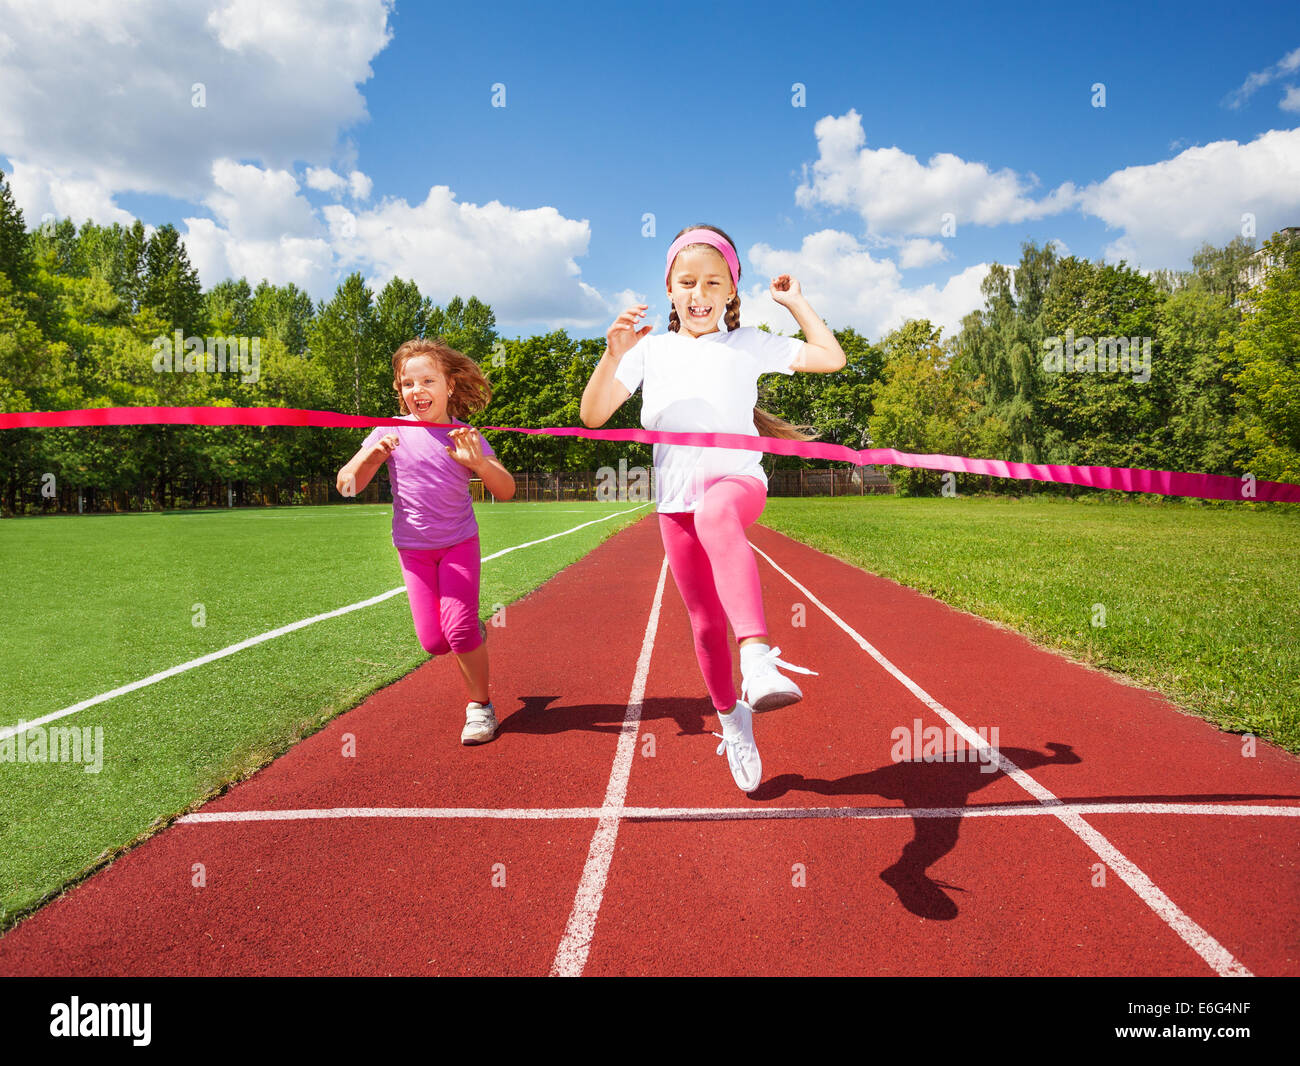 Girl runs and reaches ribbon excited to win Stock Photo